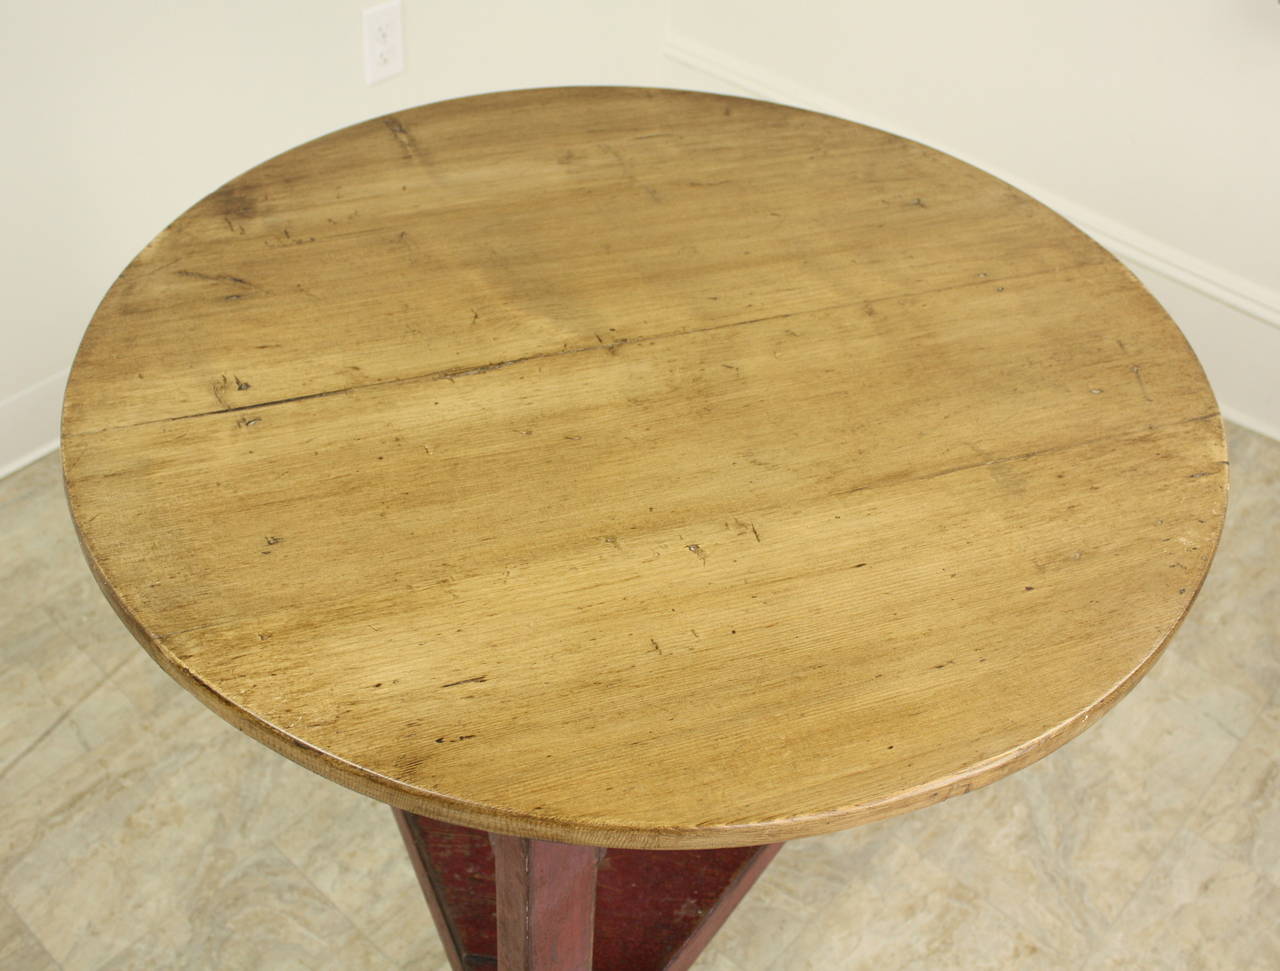 An antique Welsh cricket table. The base has the old red paint, and the top is a honey pine, both rich in wear and patina. Makes a terrific lamp table.